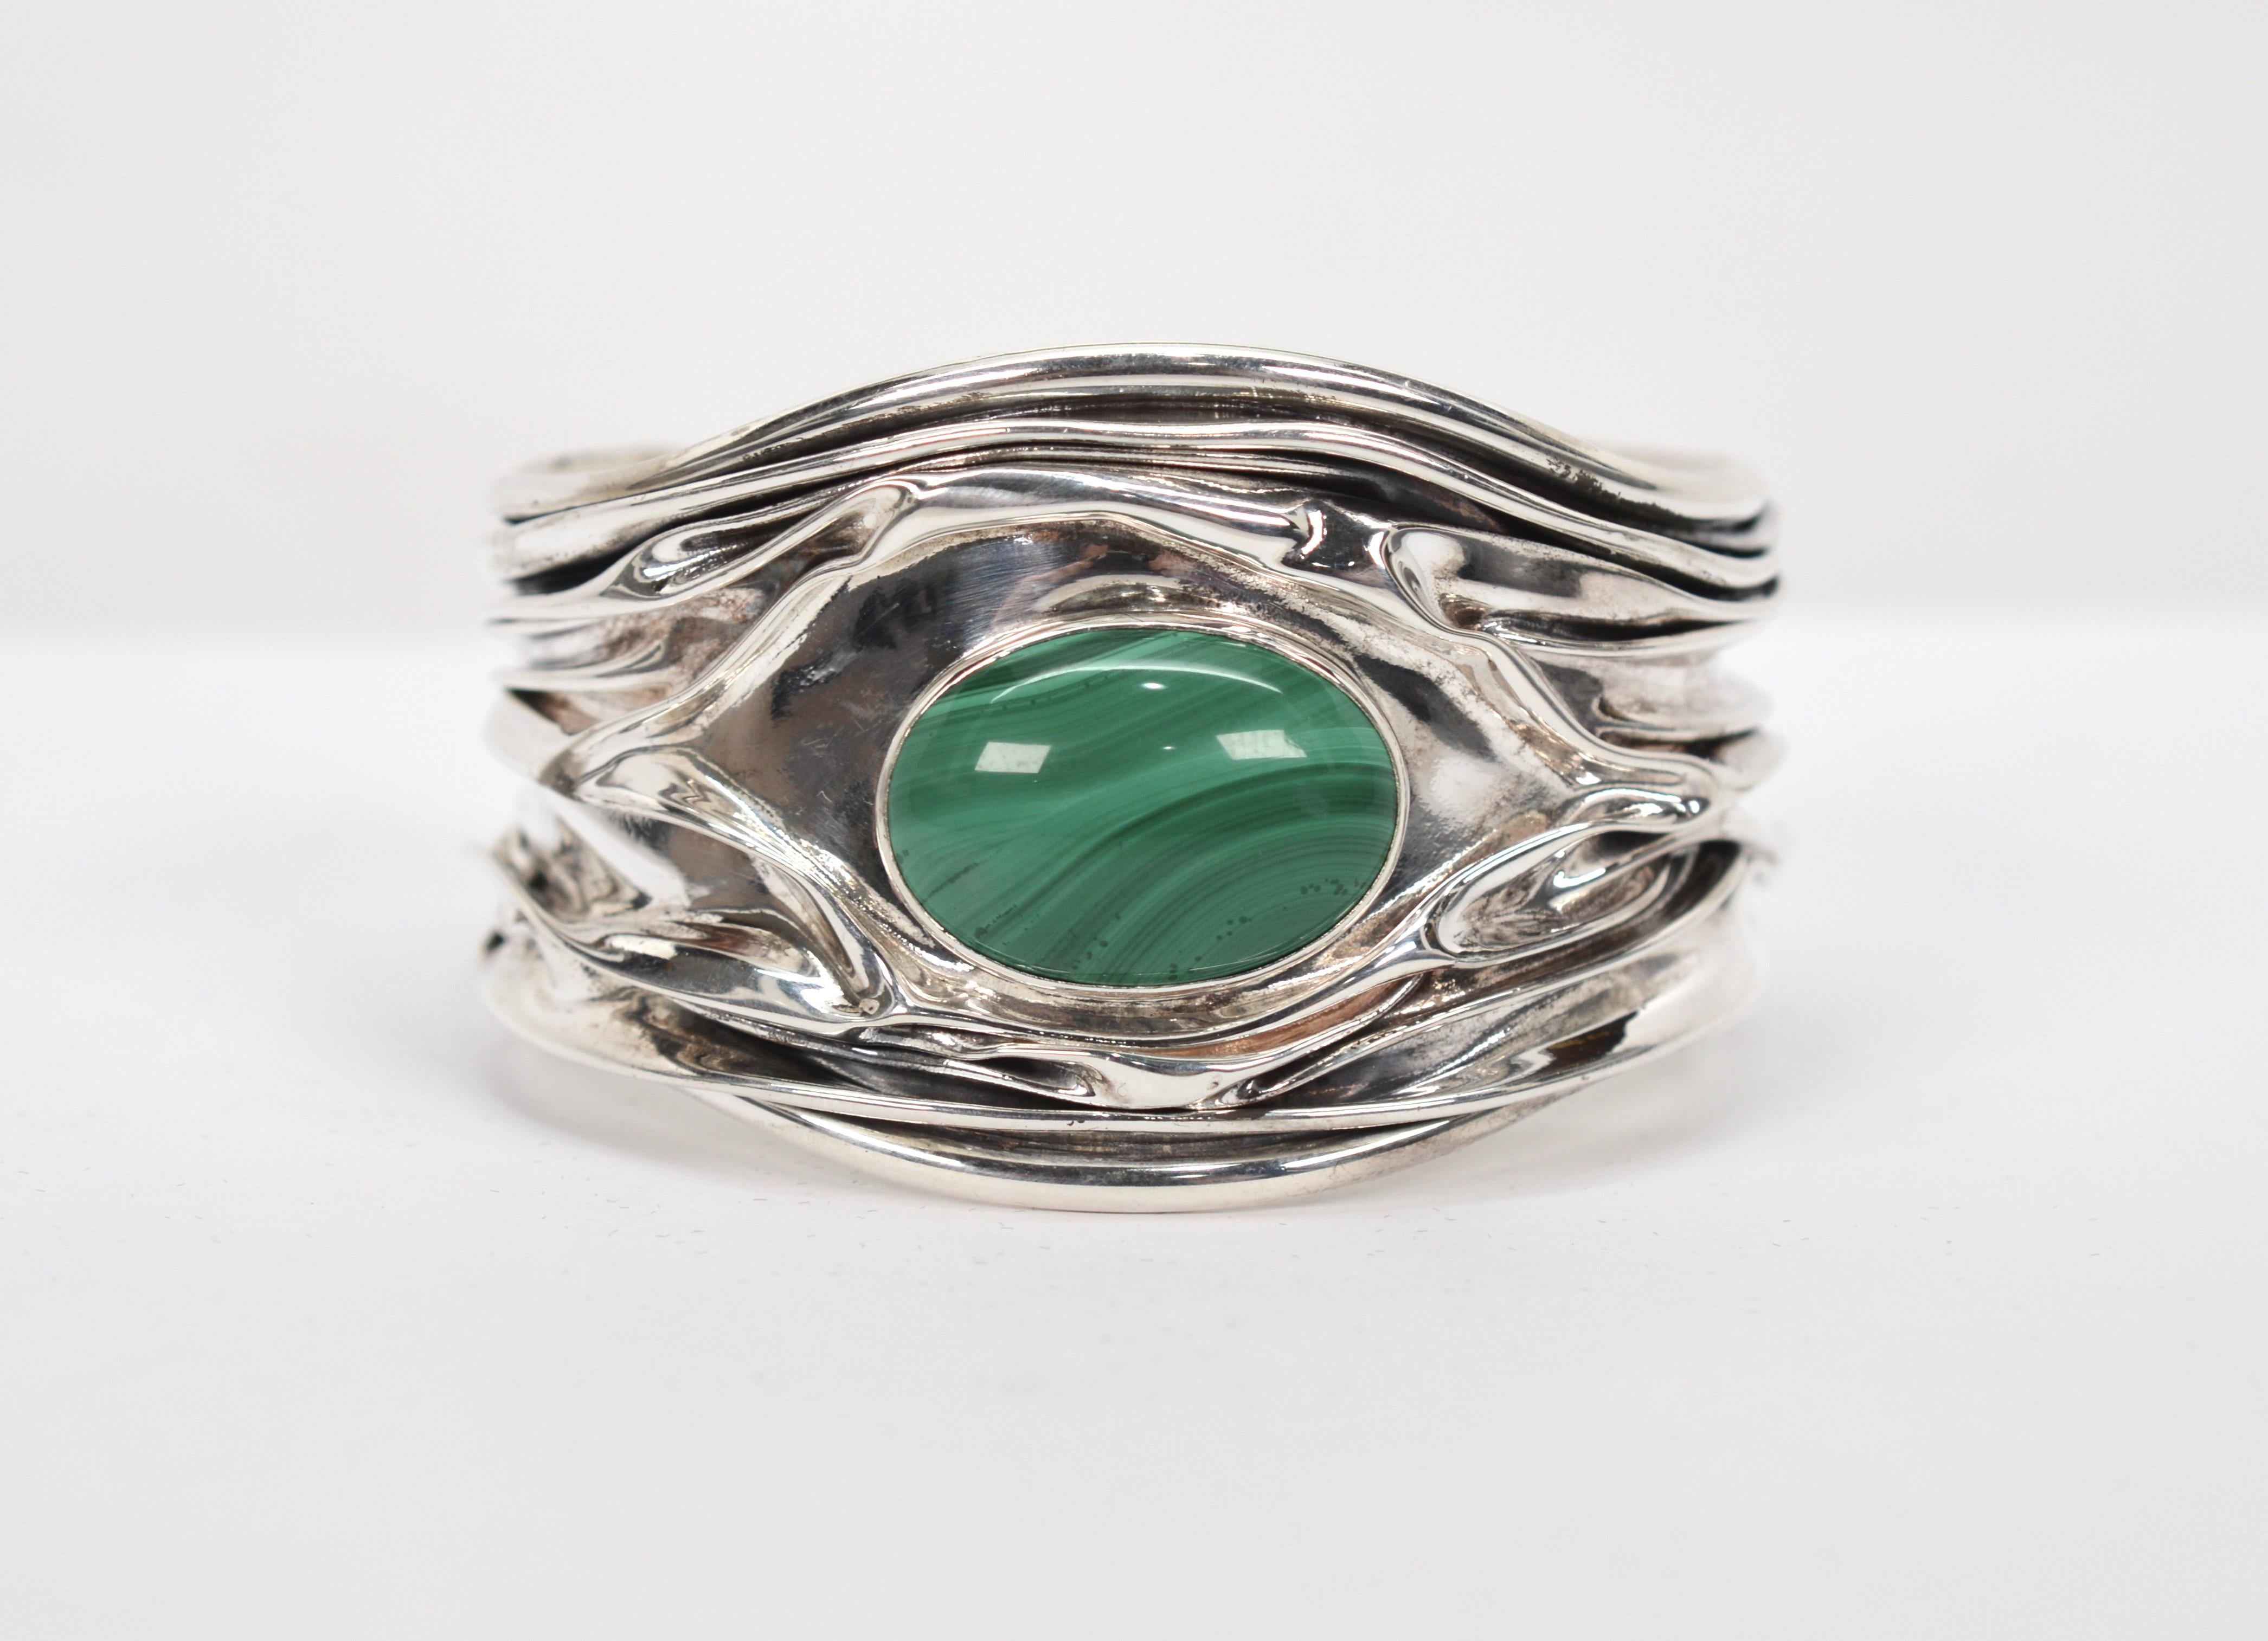 Folds of sterling silver crafted in an unique crinkle design give this cuff bracelet a unique textured and dimensional look.
Artisan created, the cuff features a bezel set oval-shaped green malachite polished stone nestled among the folds of silver